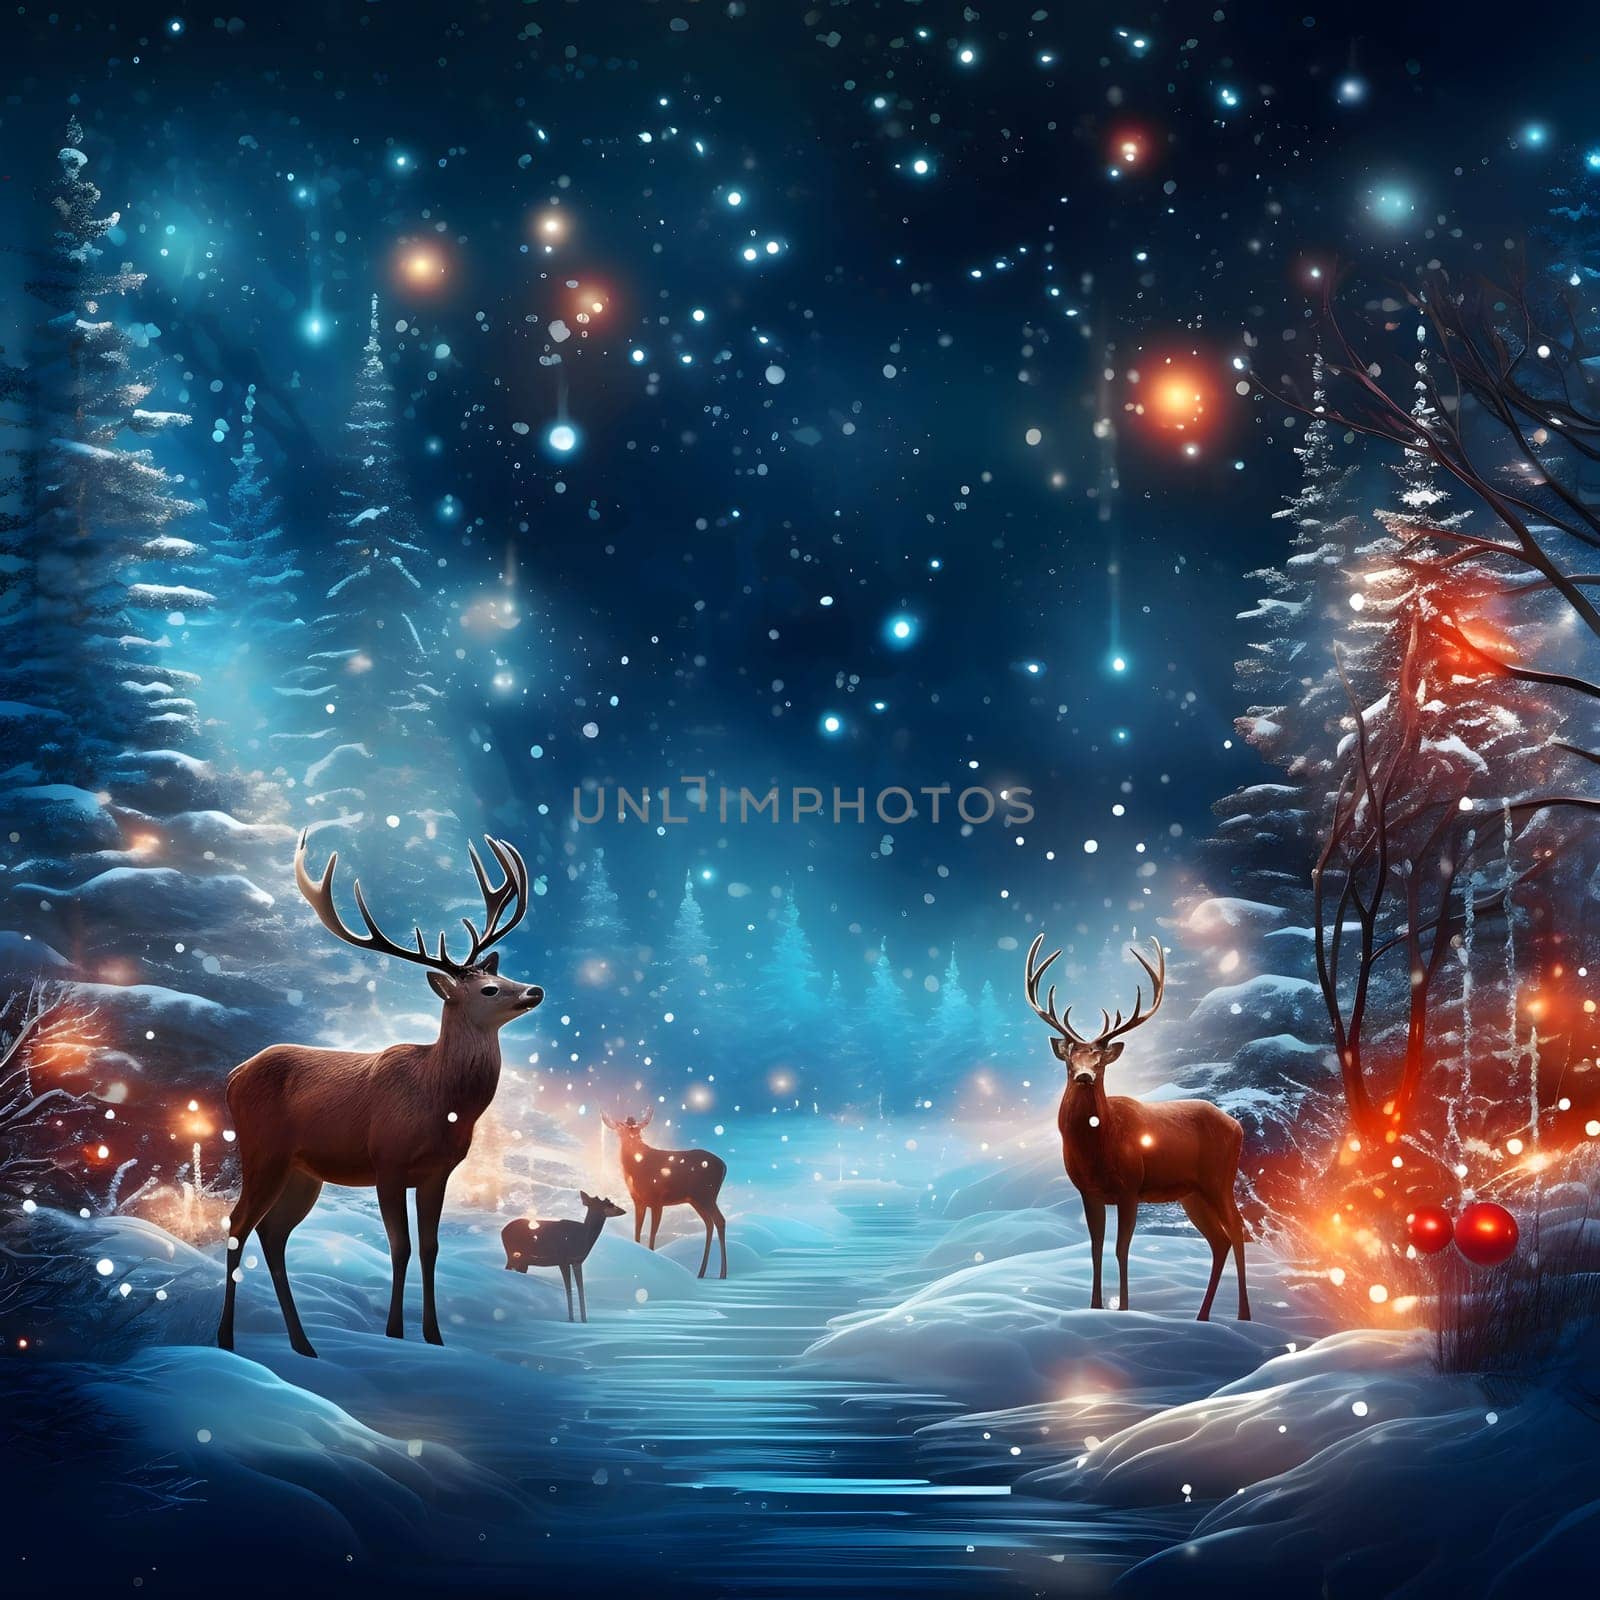 A lone deer in a snow-covered forest at night, illustration. Xmas tree as a symbol of Christmas of the birth of the Savior. A time of joy and celebration.